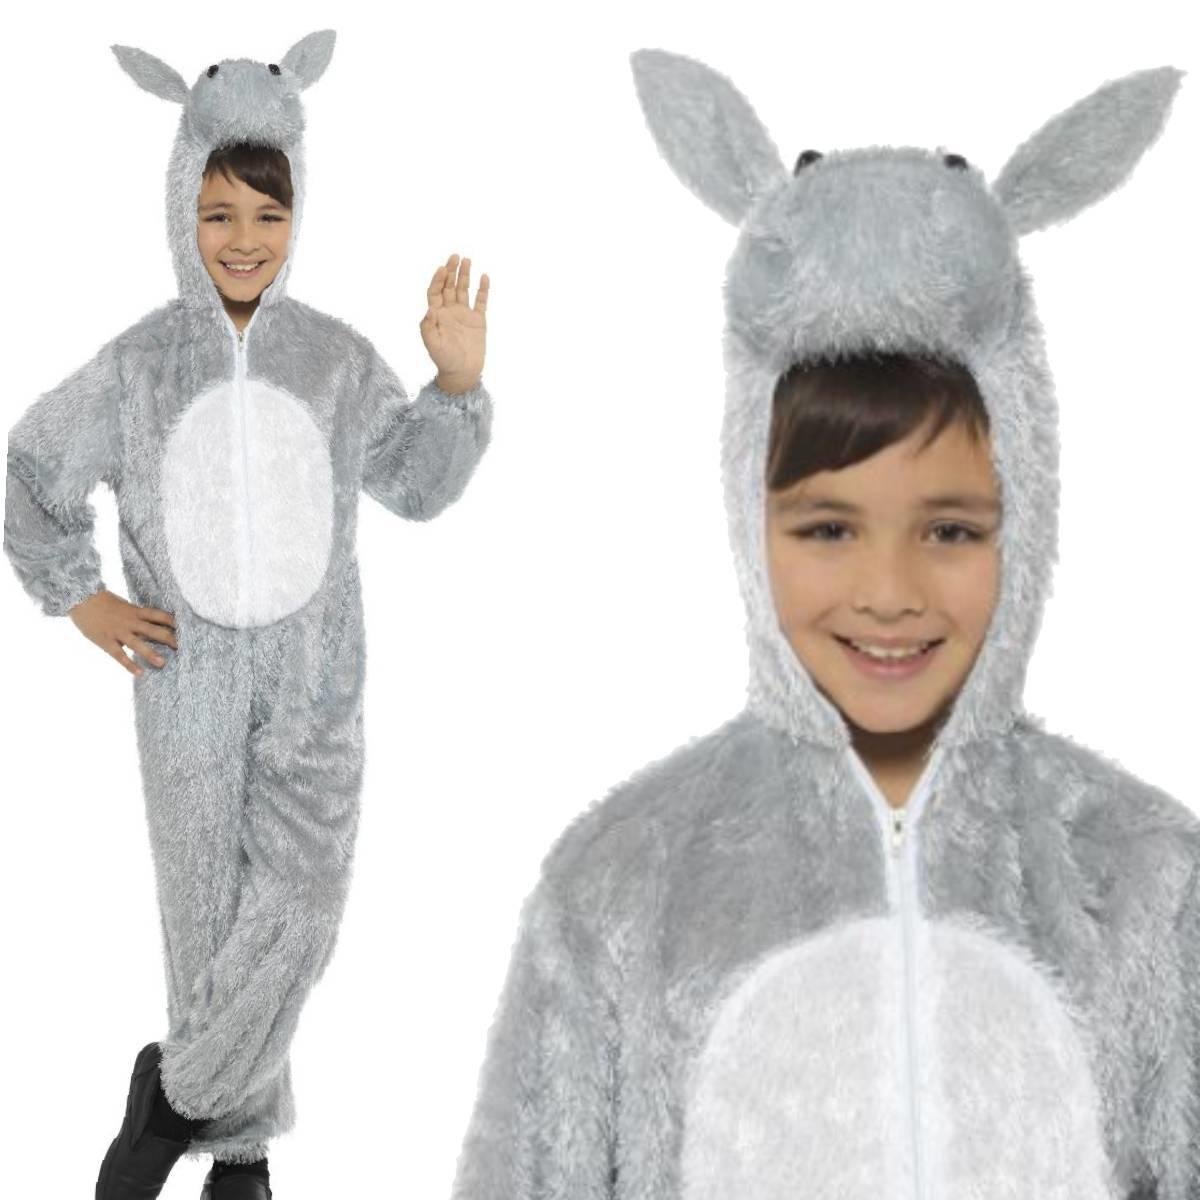 Kid's donkey fancy dress costume 30018 for farmyard parties and Christmas Nativity productions available here at Karnival Costumes online party shop